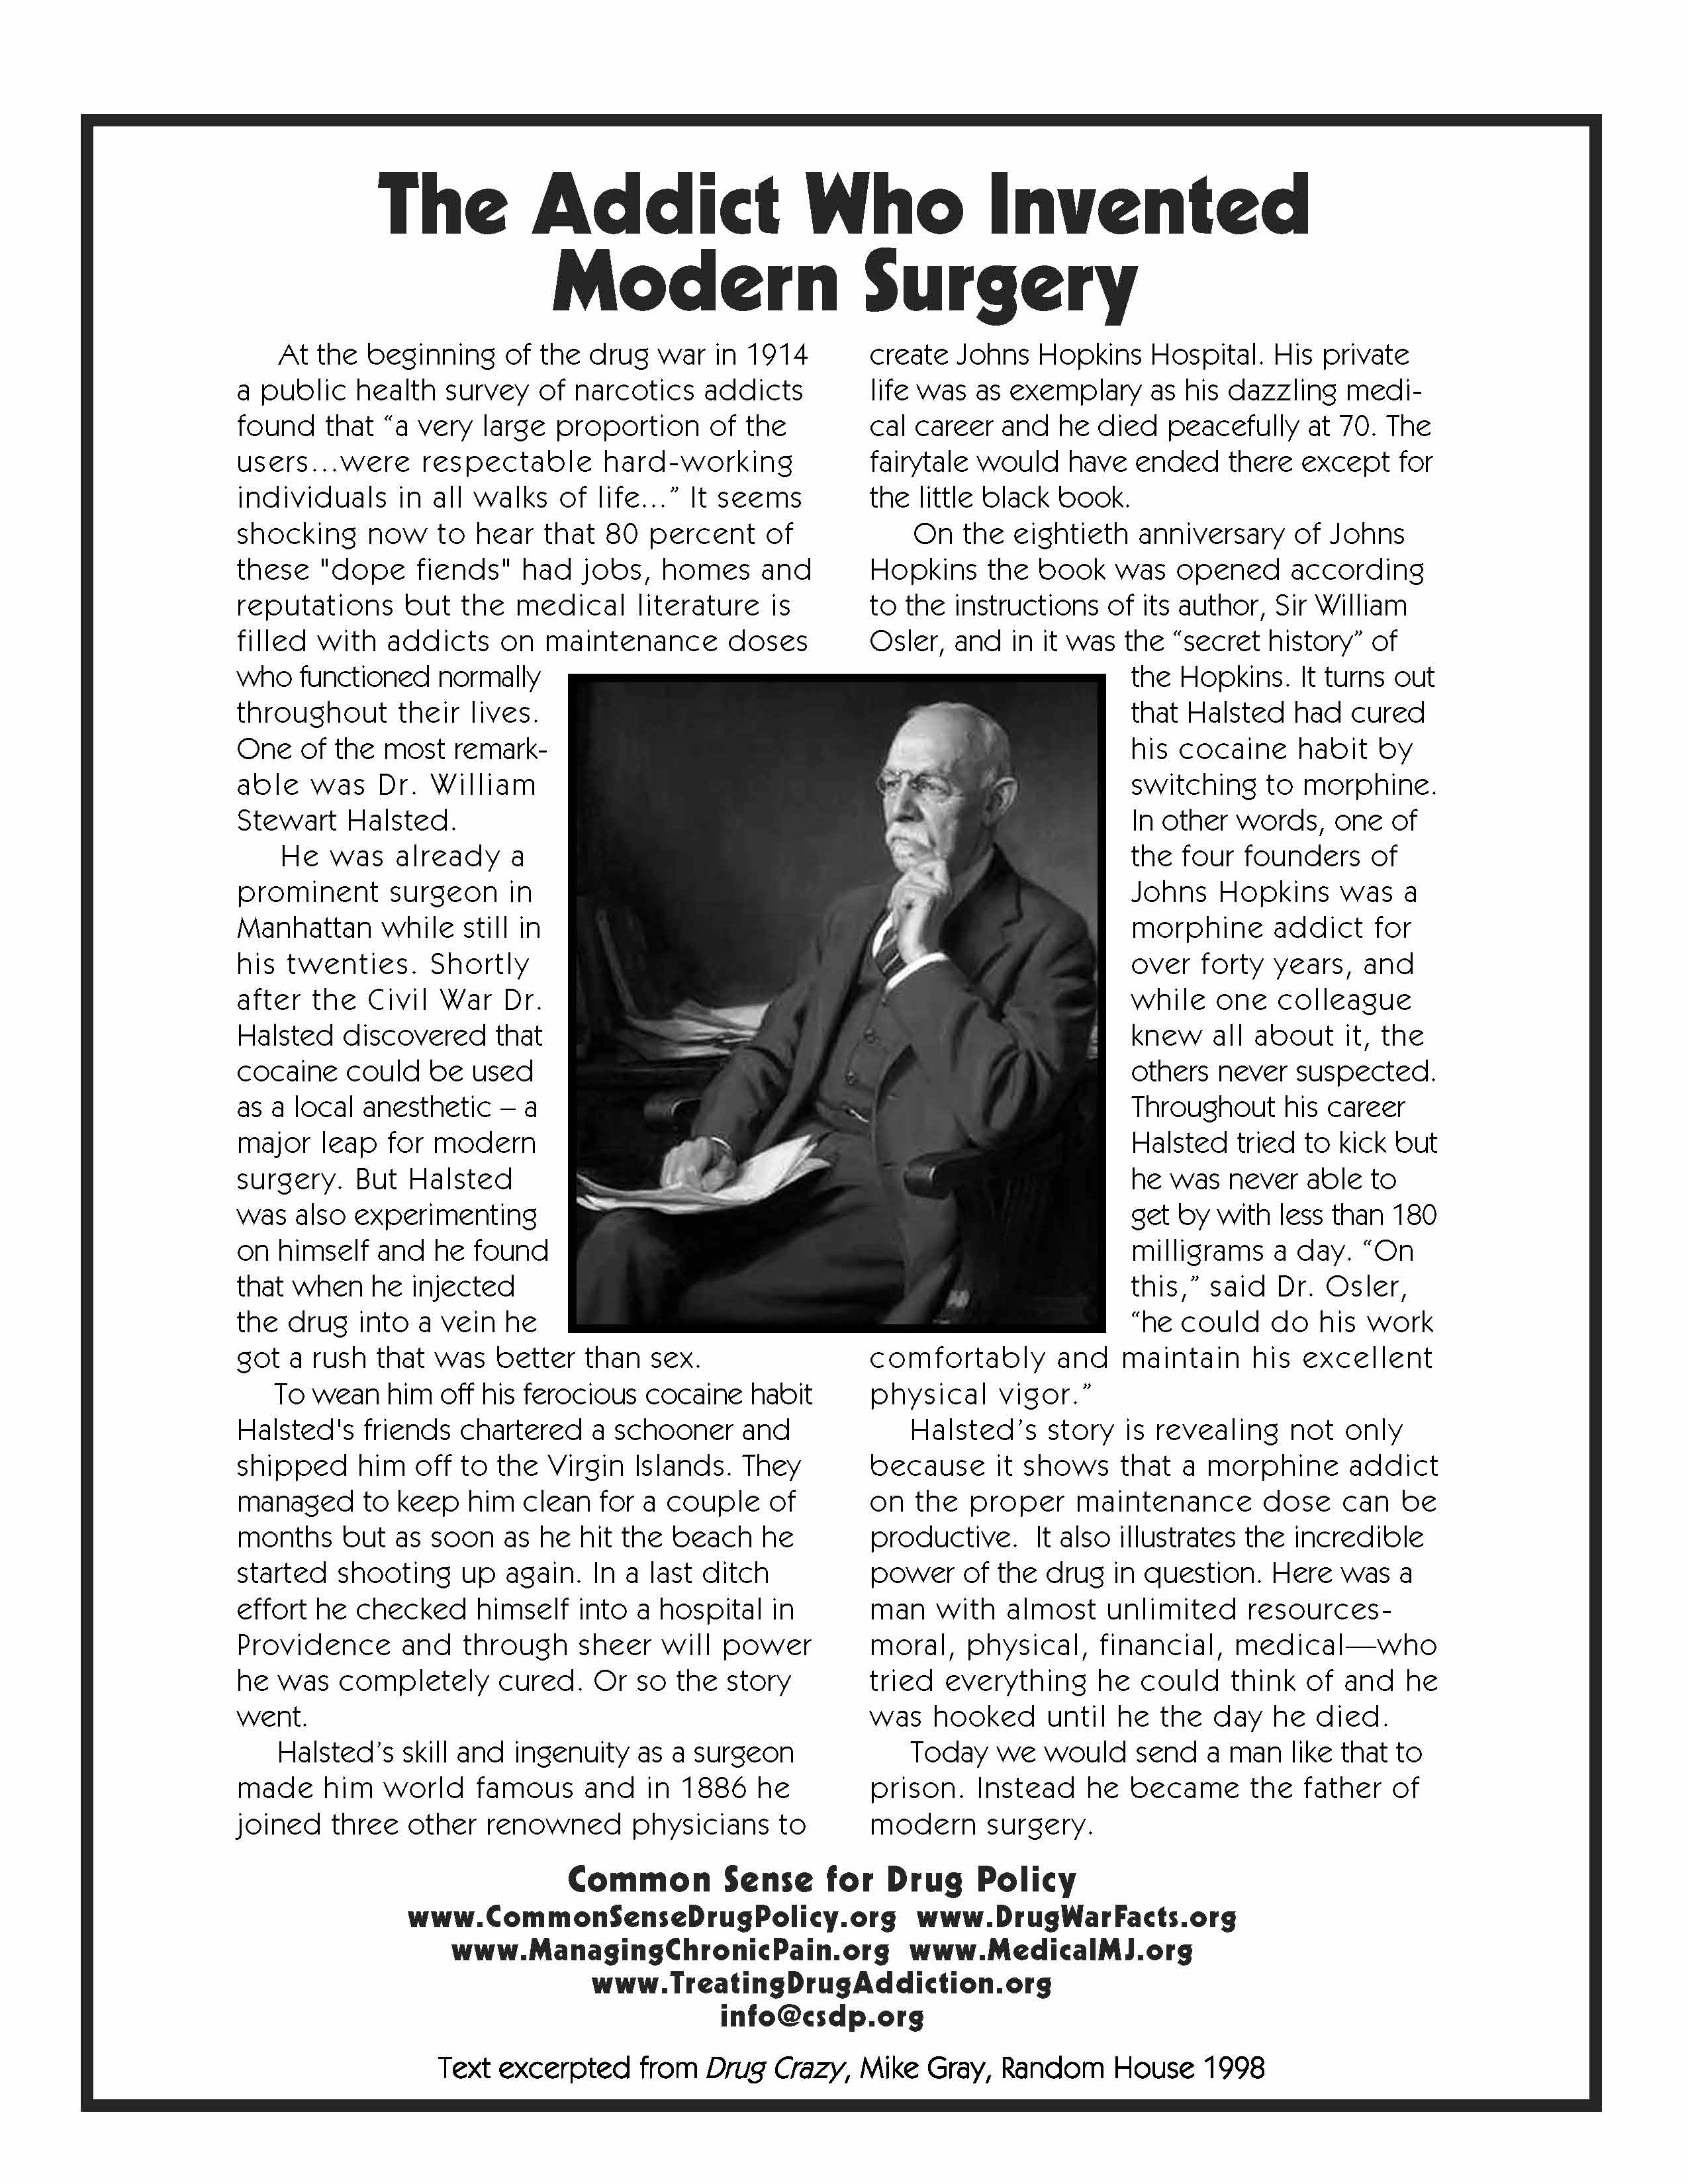 The Addict Who Invented Modern Surgery